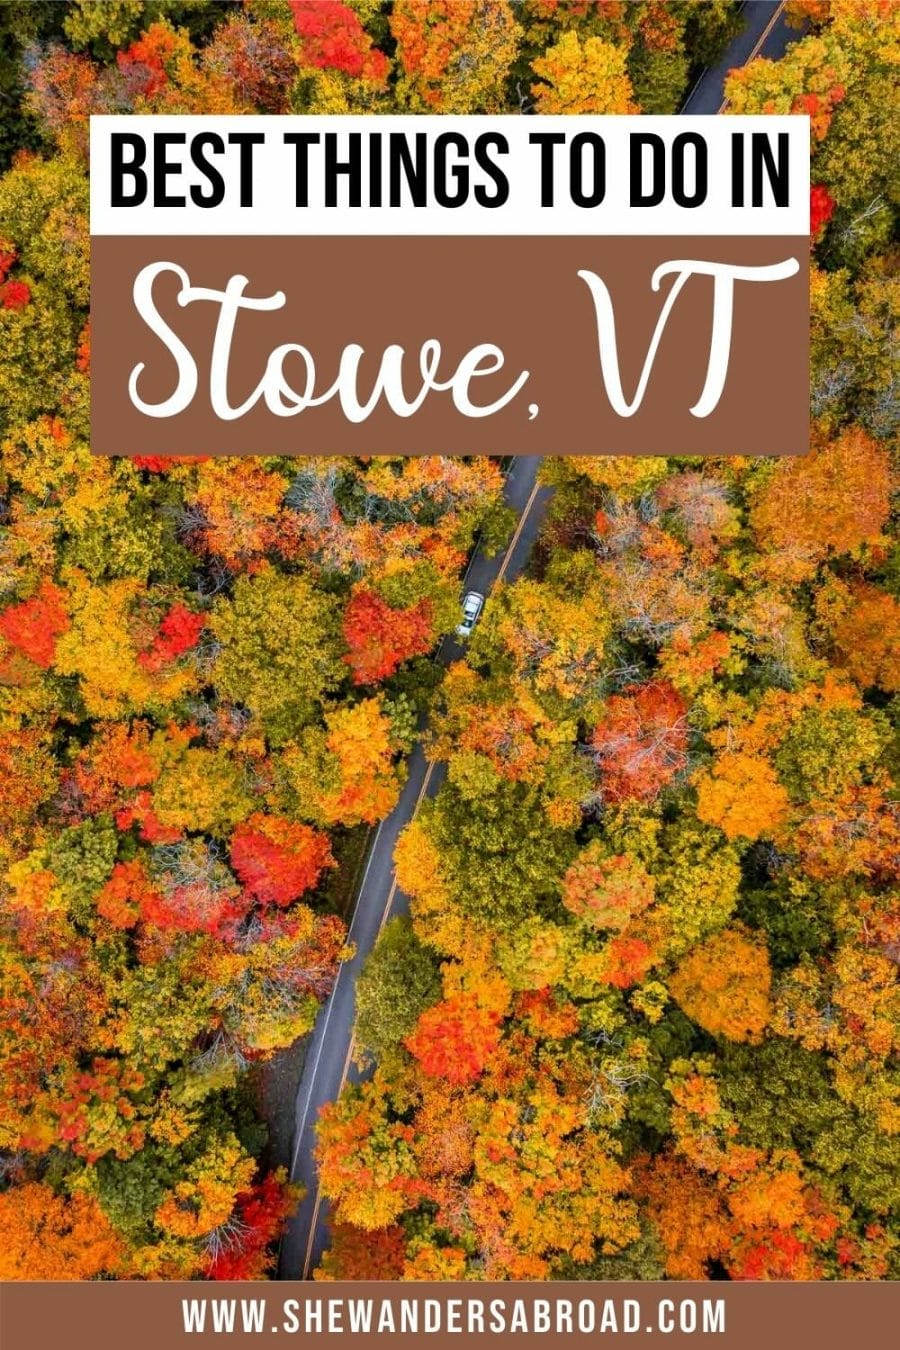 18 Best Things to Do in Stowe, Vermont